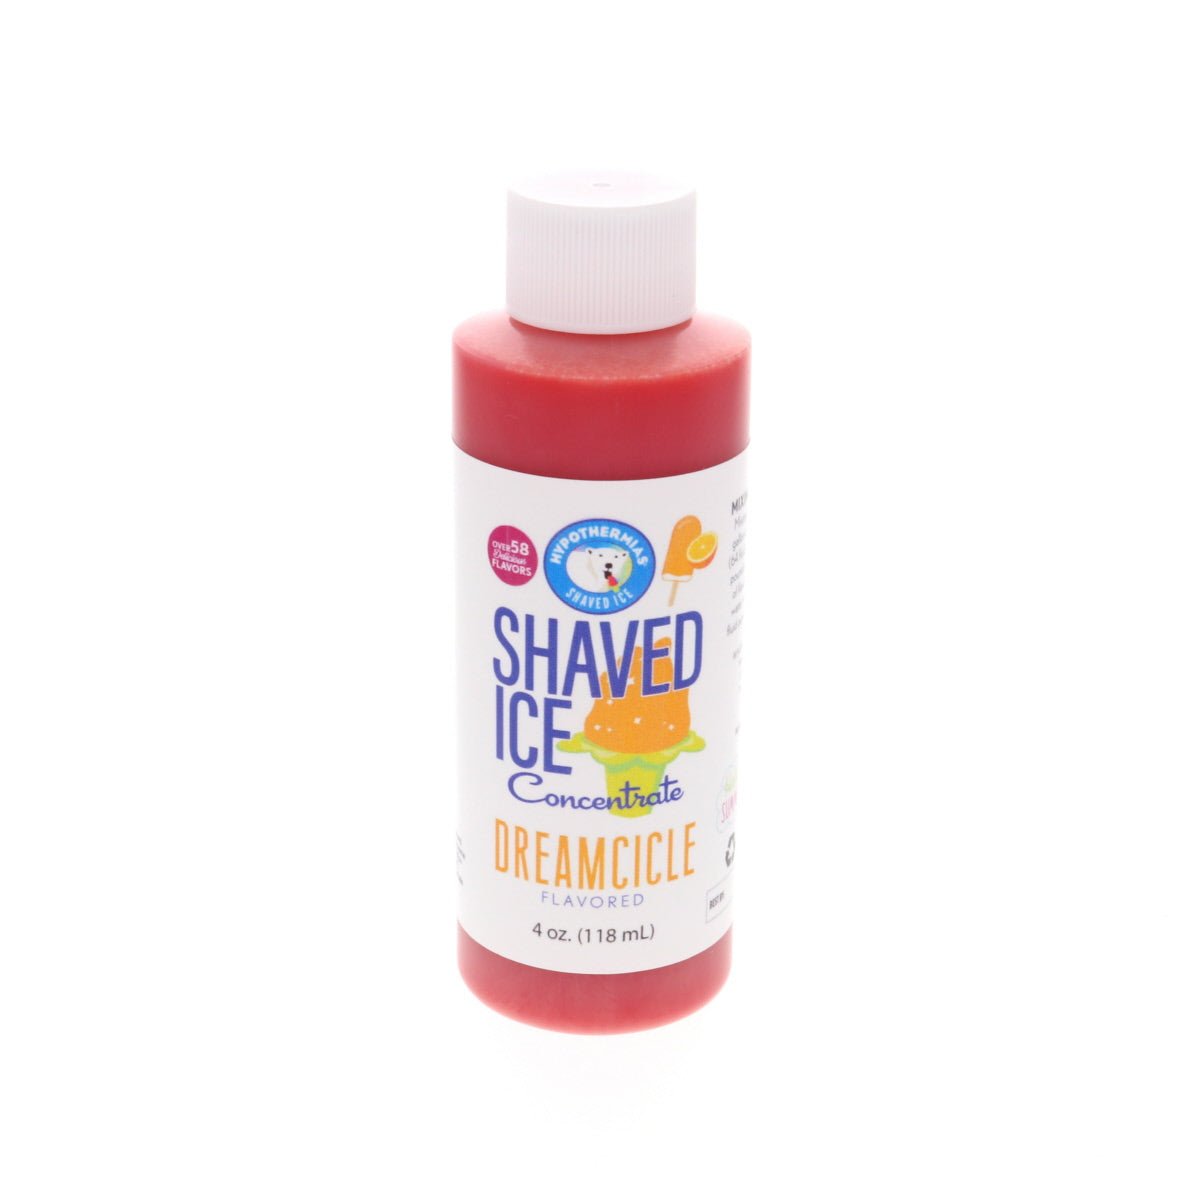 Hypothermias dreamcicle shaved ice or snow cone flavor syrup concentrate 4 Fl Oz.